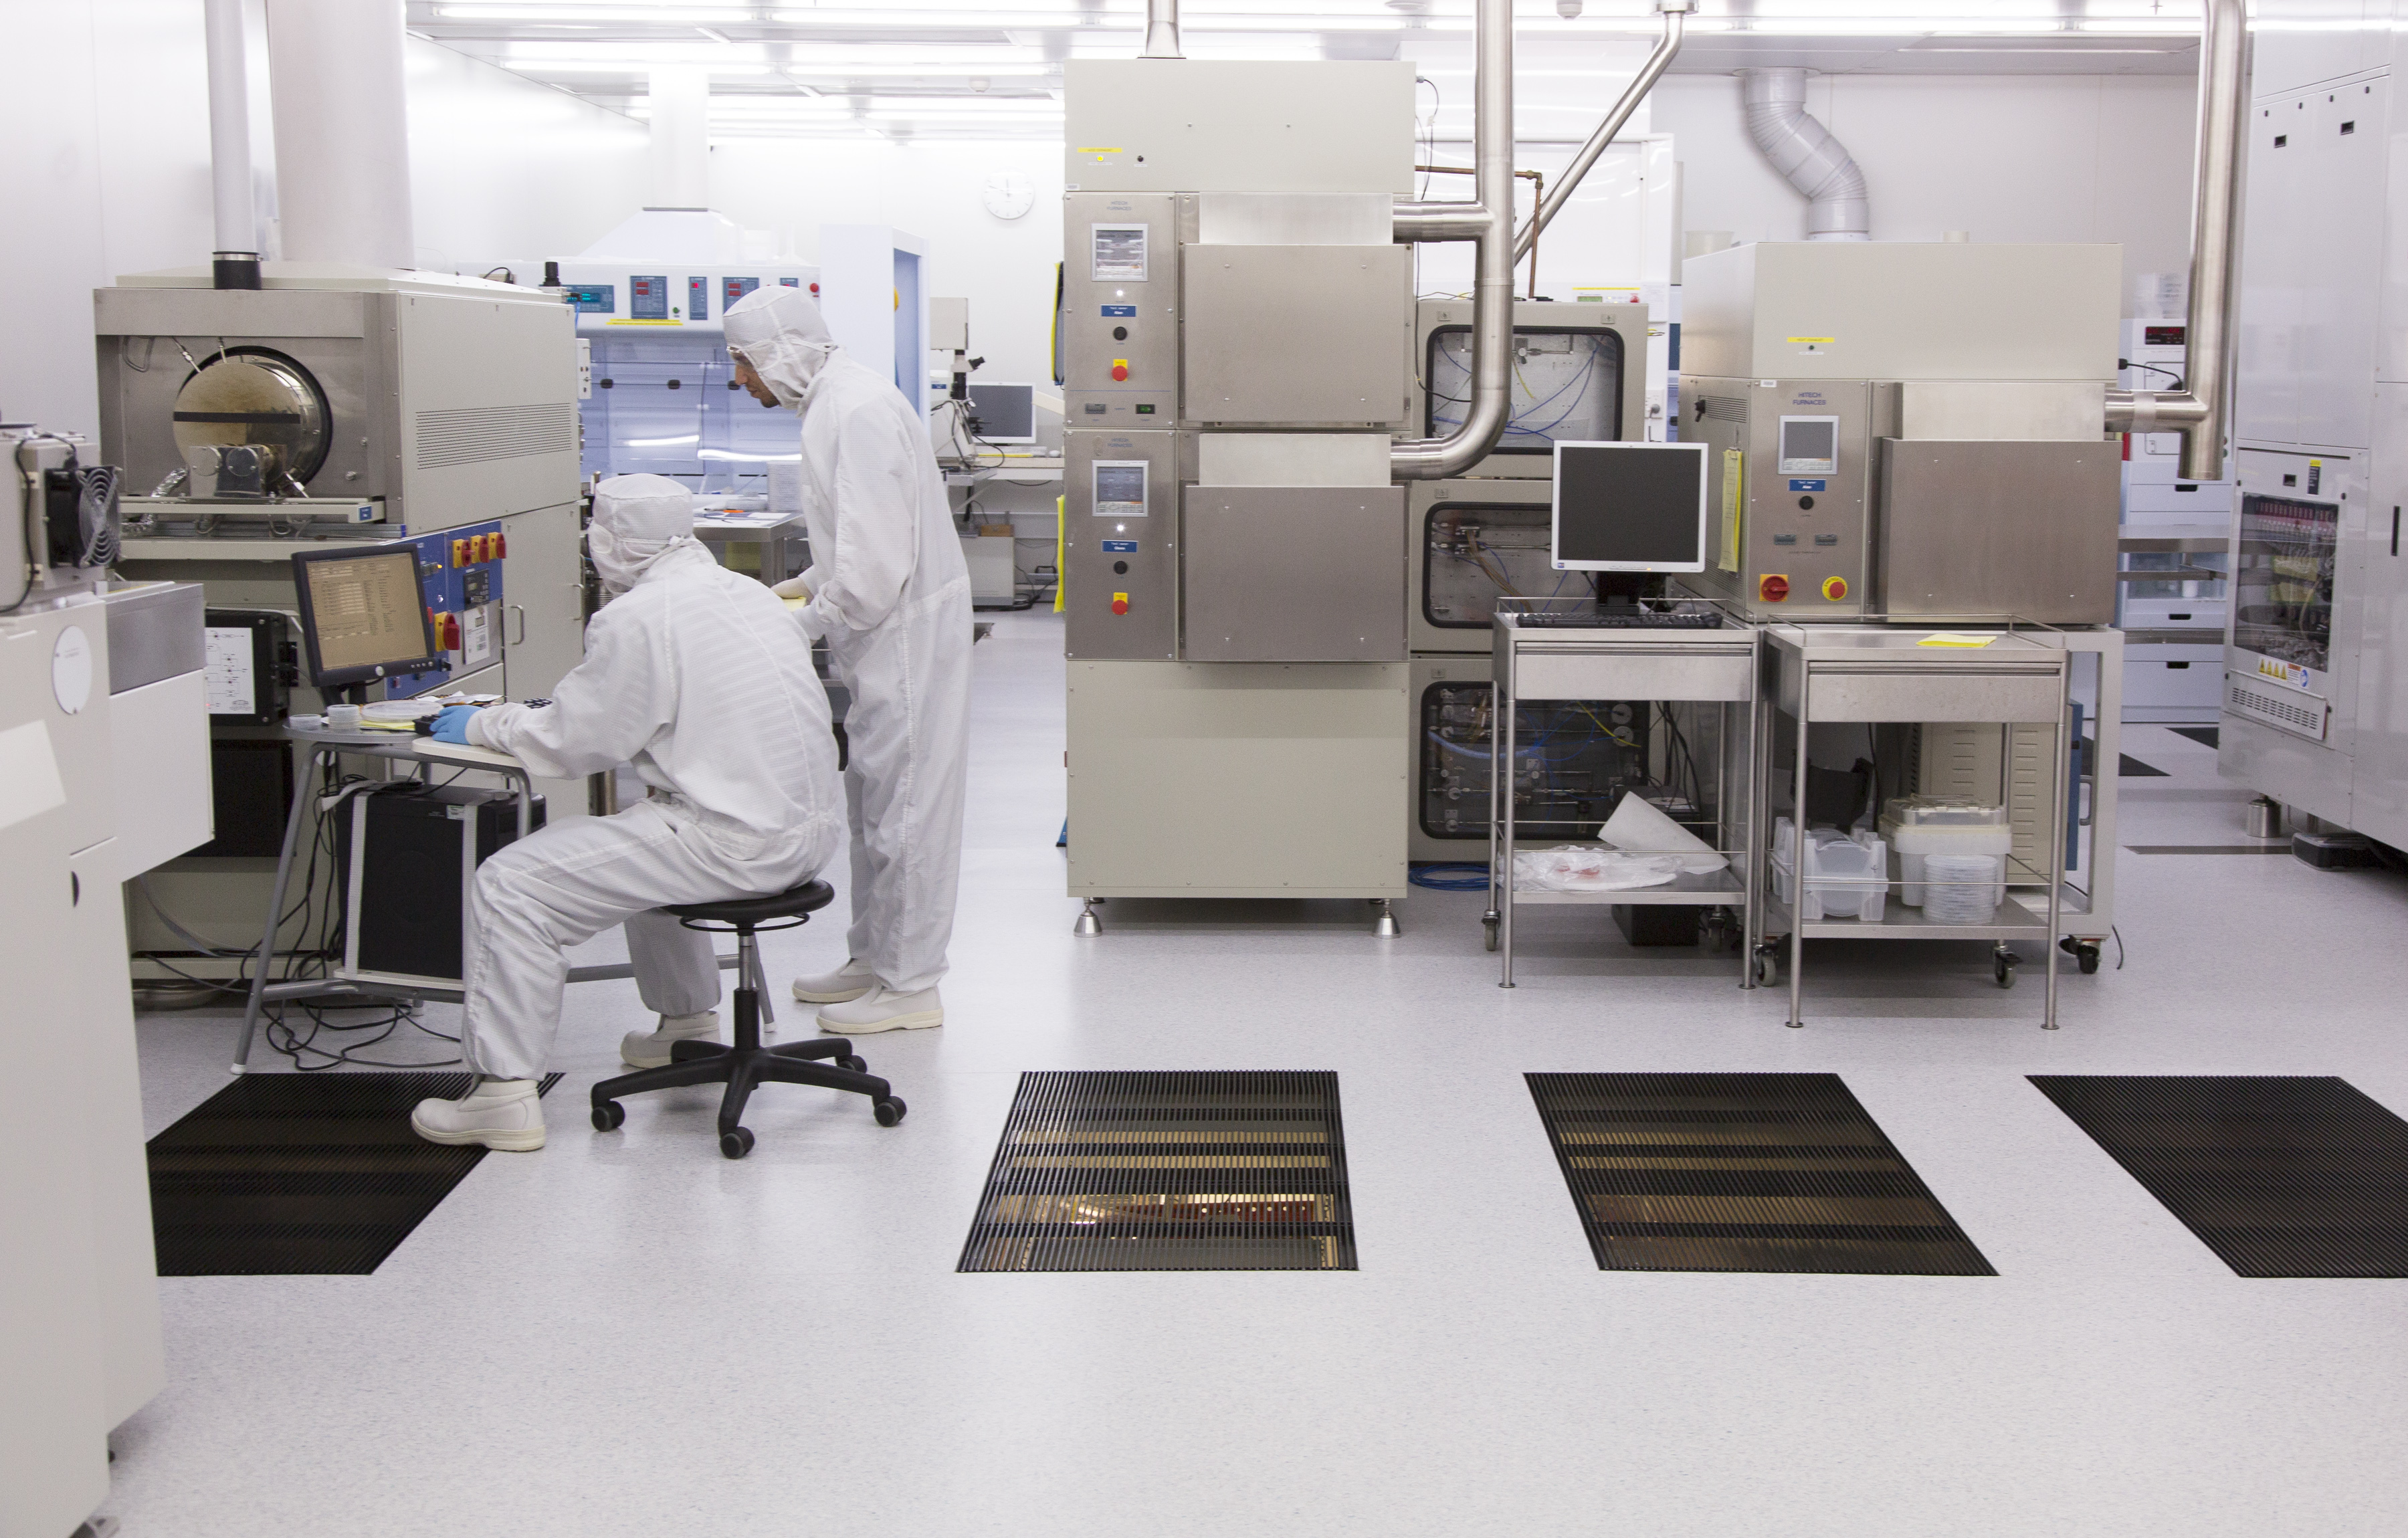 Scientists at work in the Queensland Microtechnology Facility clean room